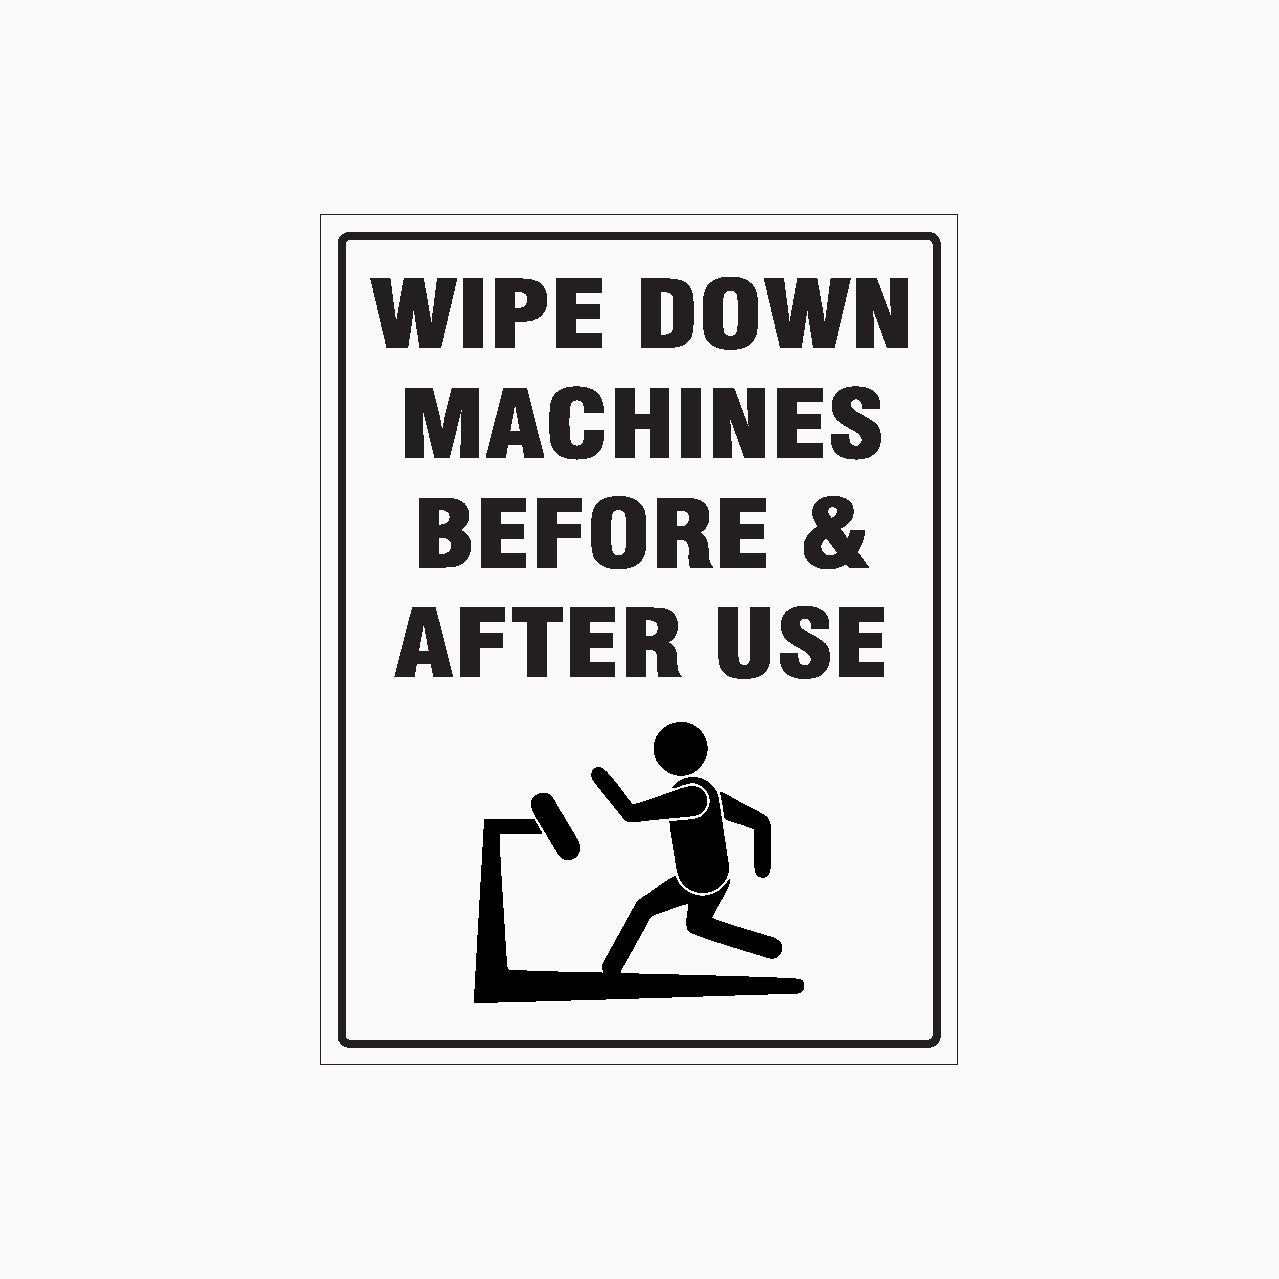 WIPE DOWN MACHINE BEFORE & AFTER USE SIGN